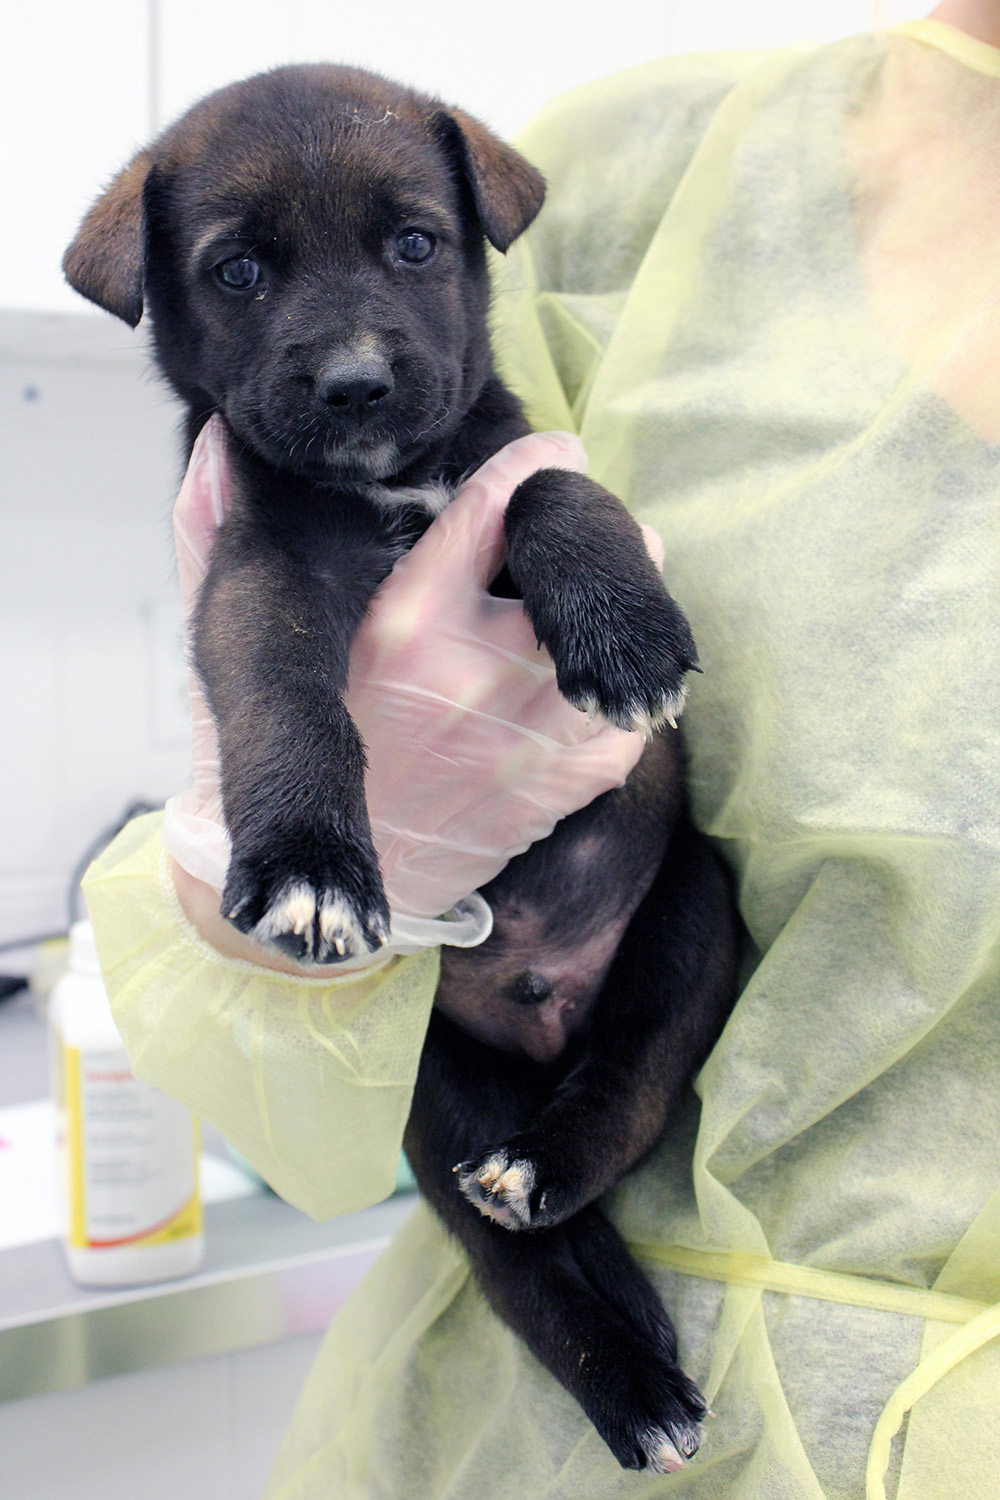 The Ontario SPCA and Humane Society seeks homes for 46